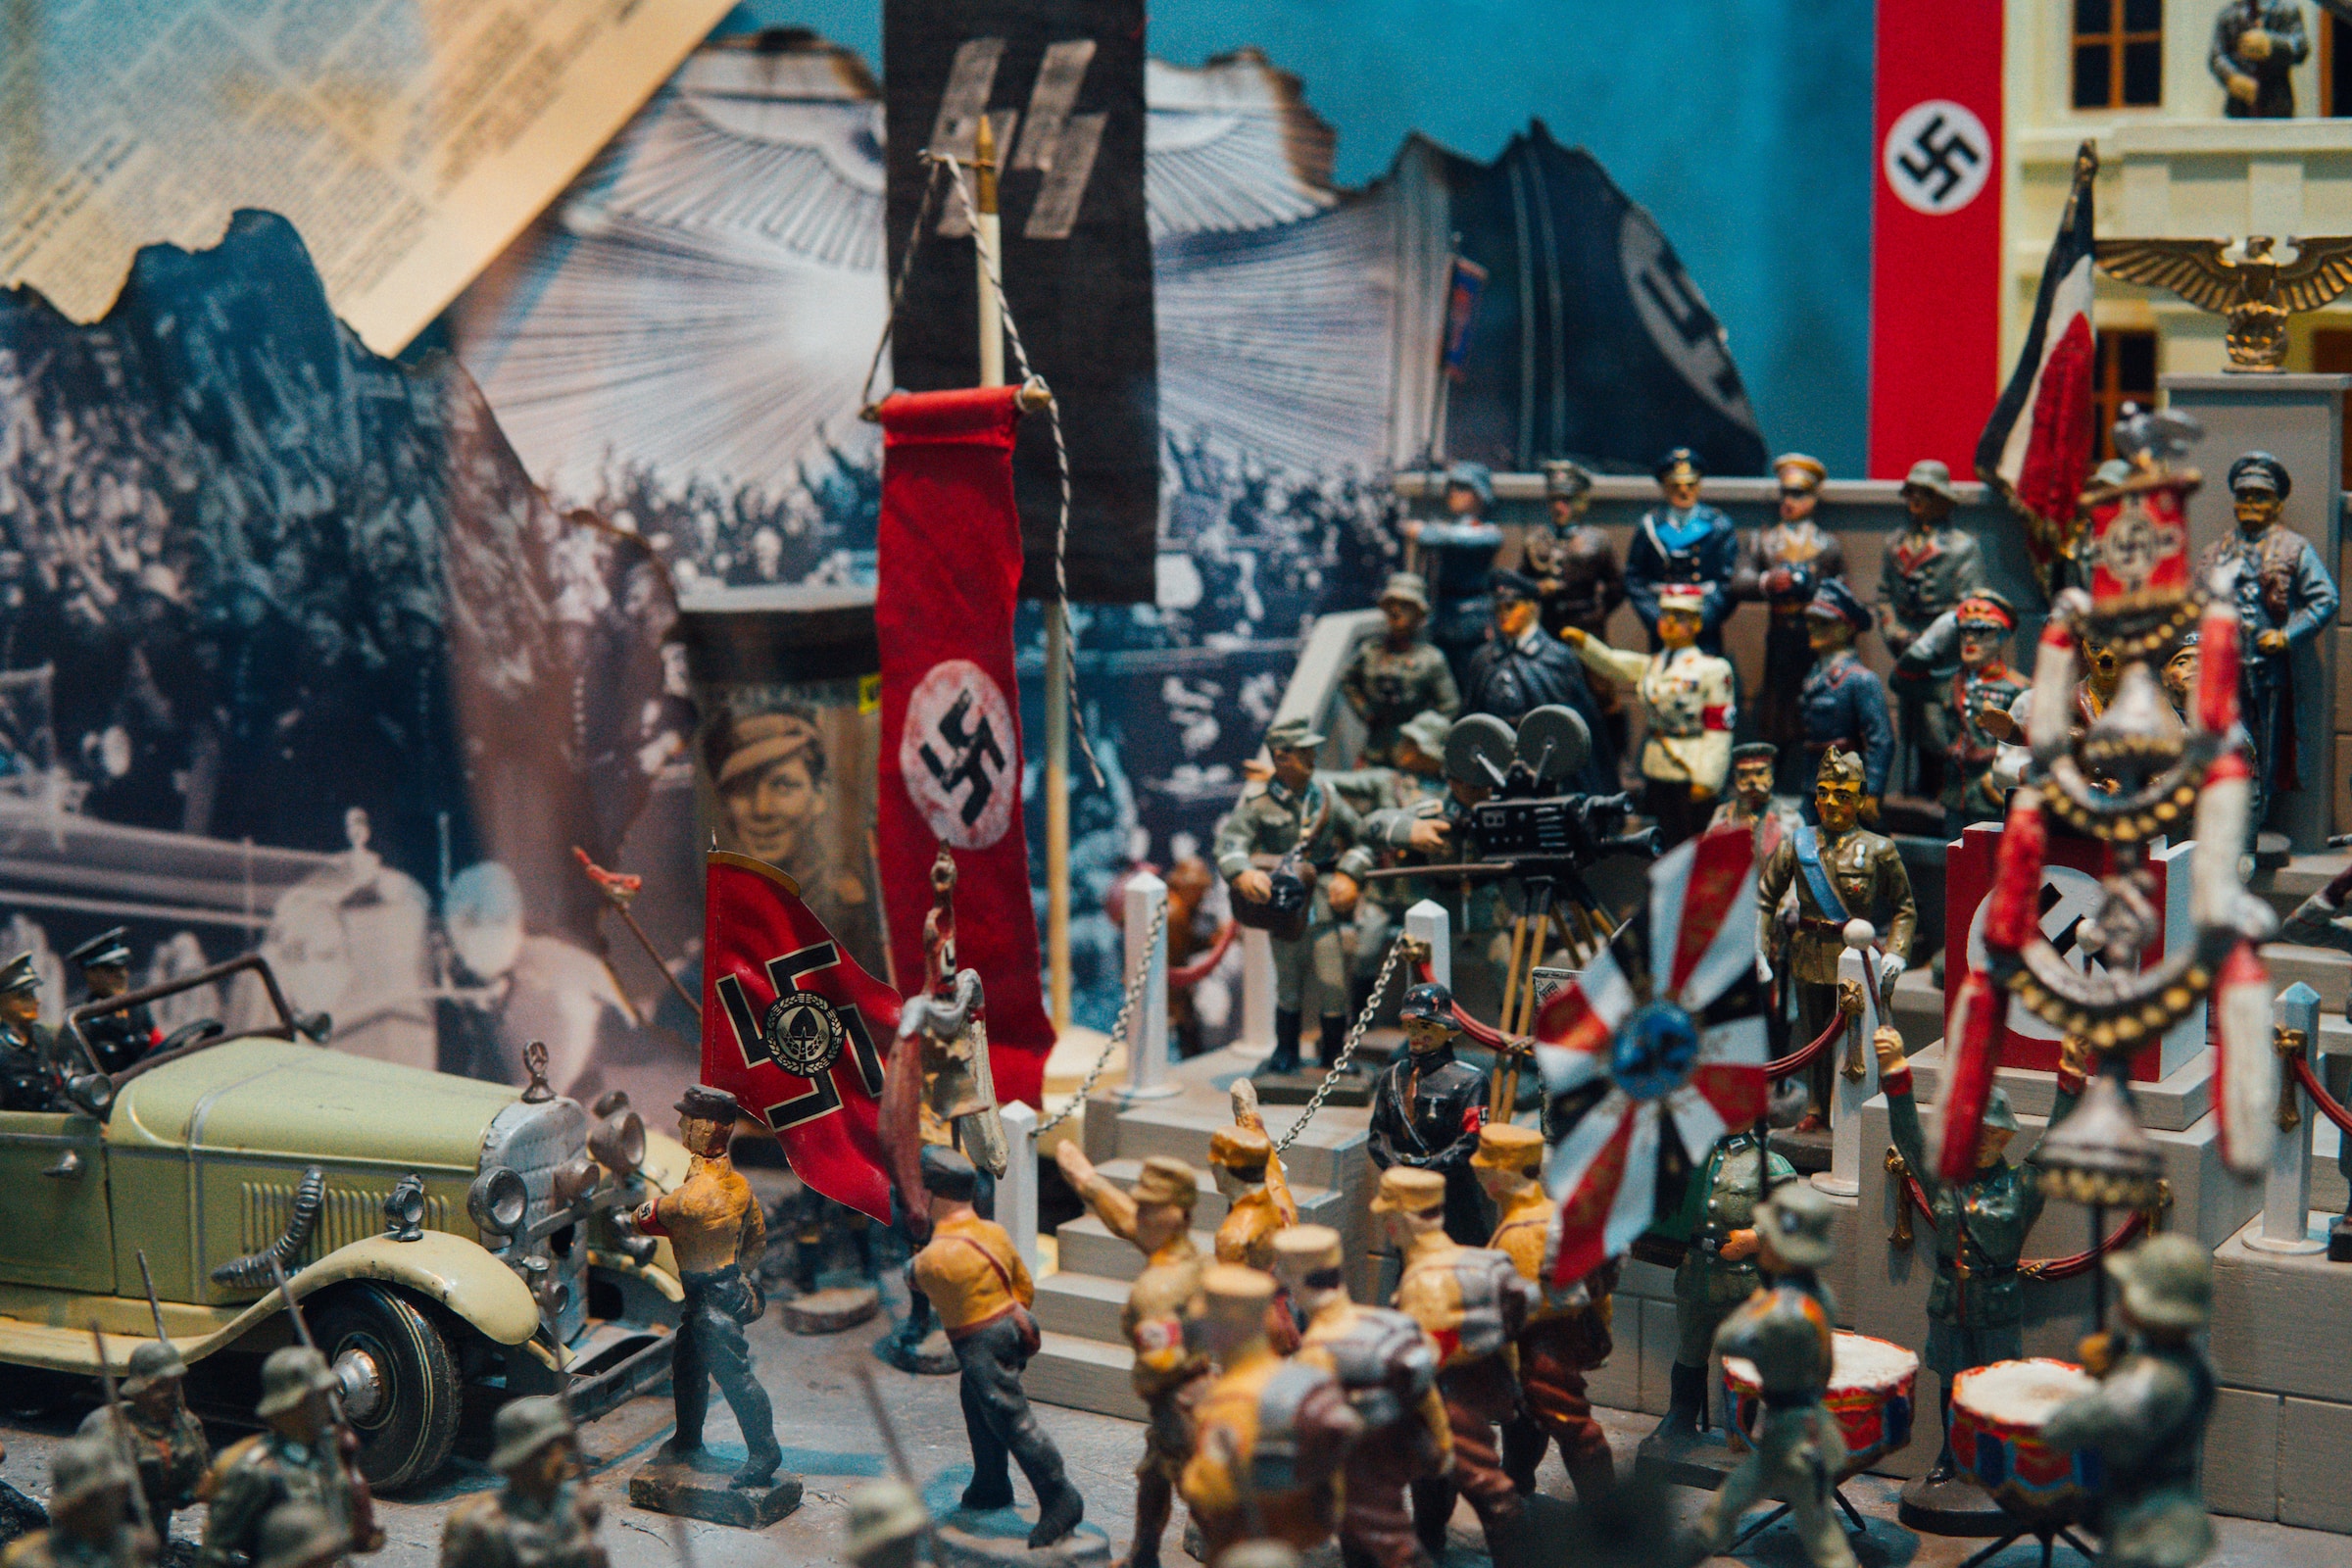 Nazi soldier figurines set up in a parade with swastika banners and flags